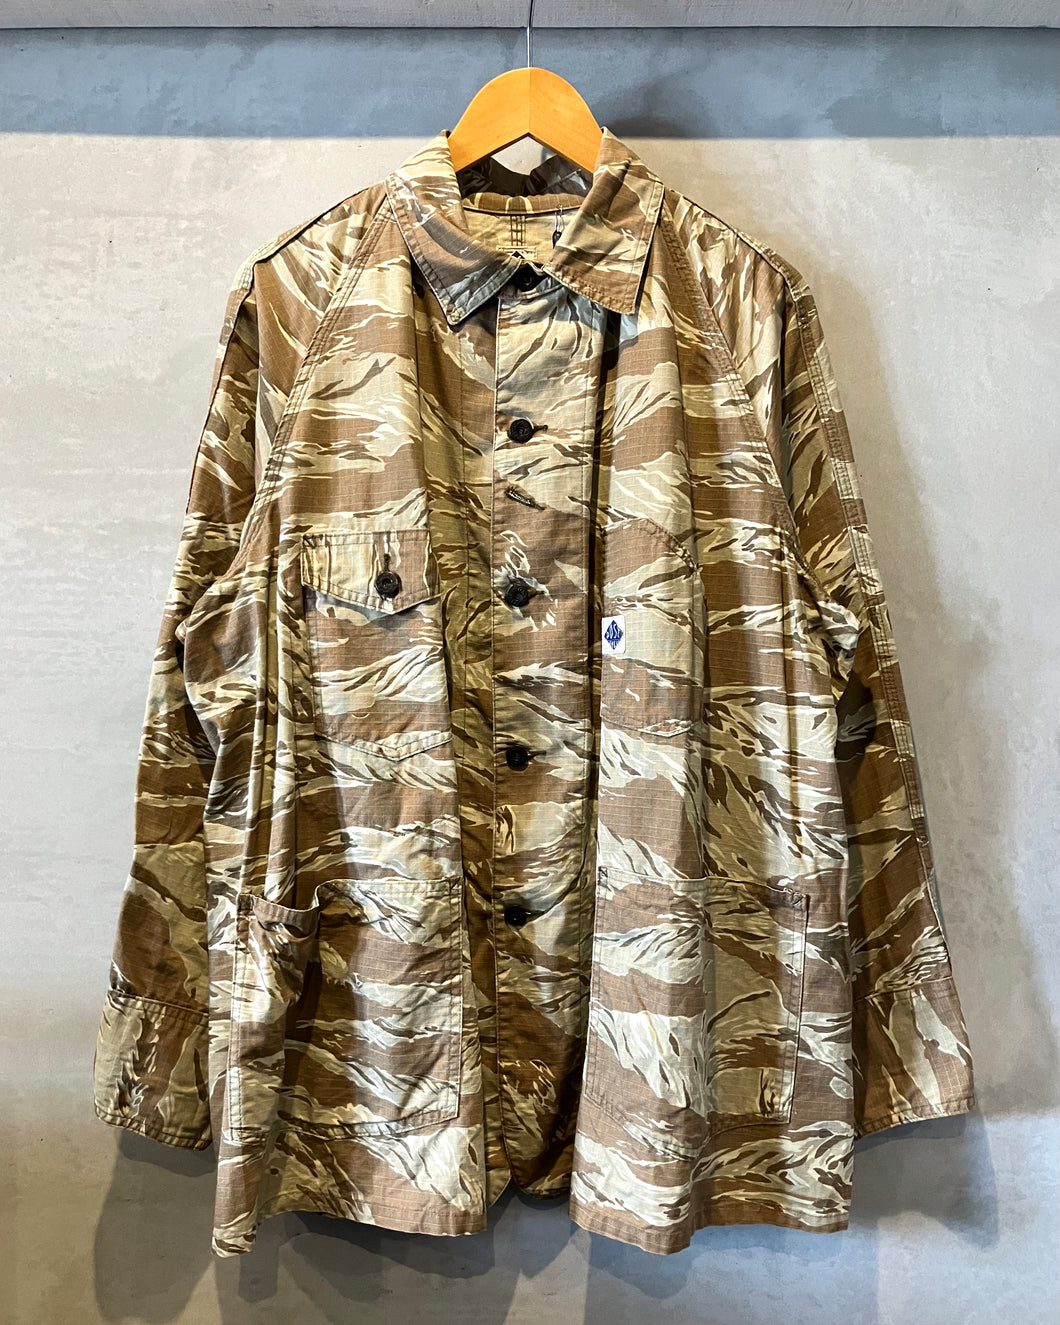 POST O’ALLS-Jacket-(size L)Made in U.S.A.